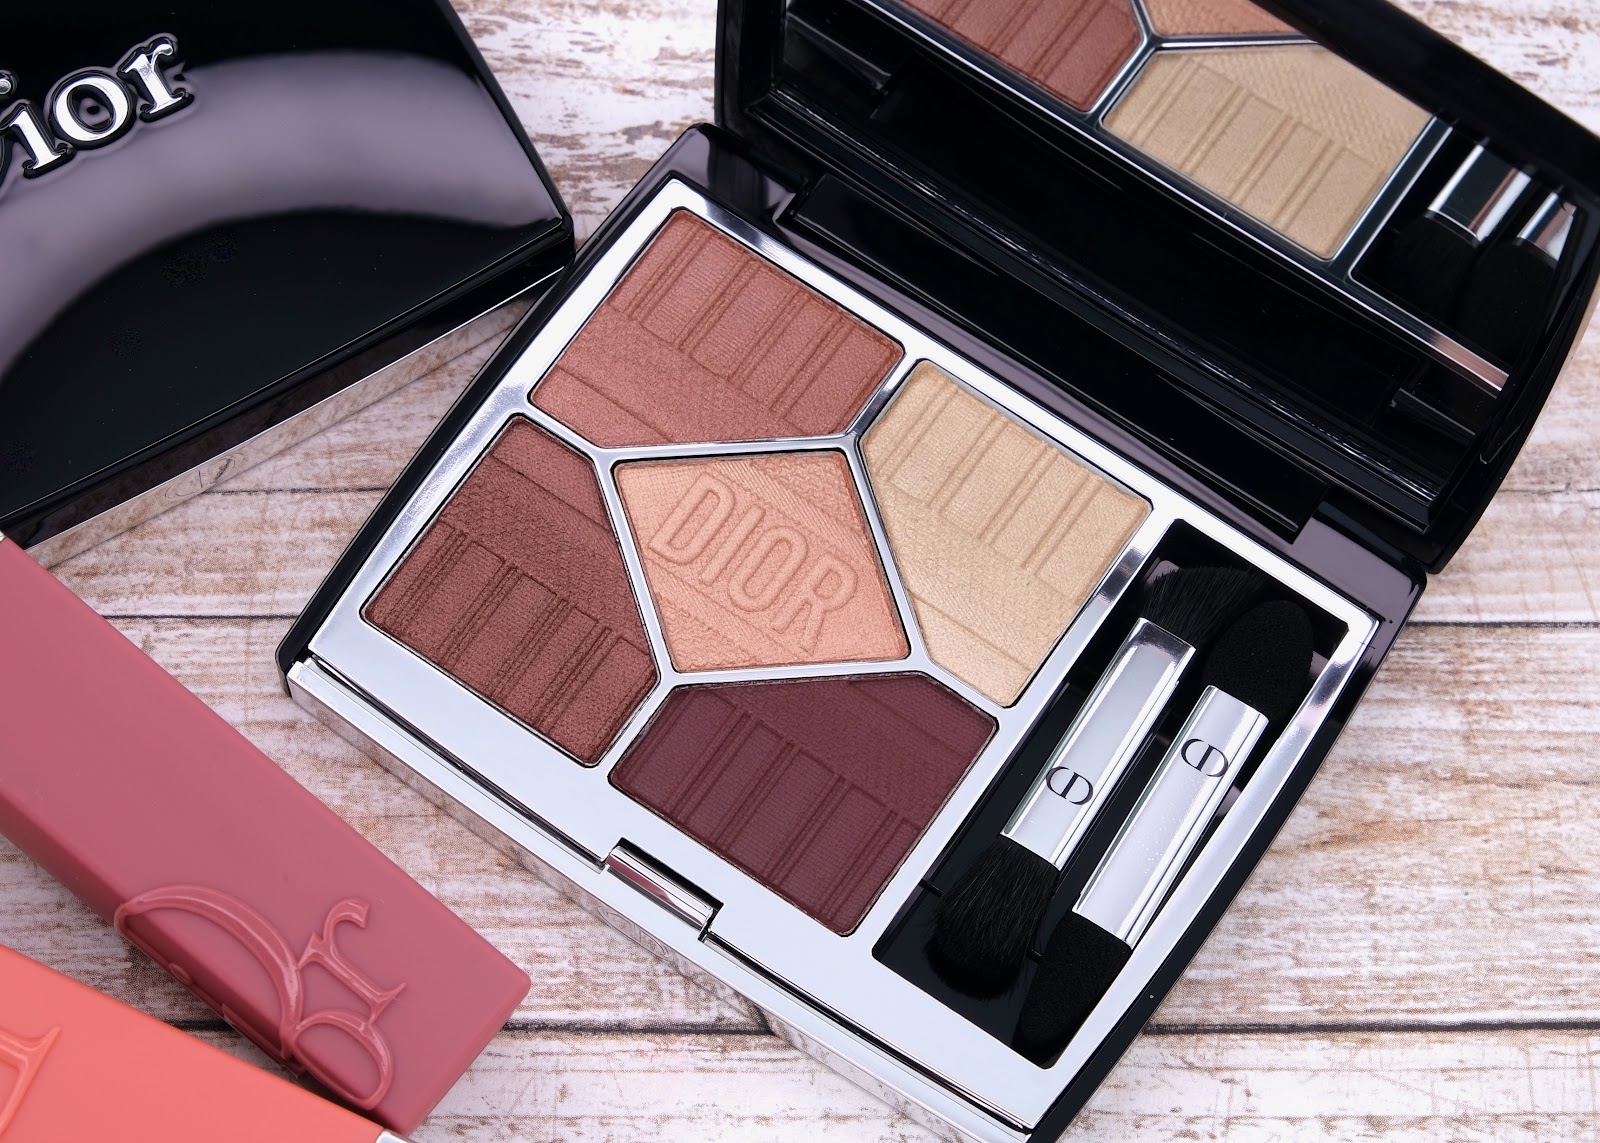 Dior | Summer 2022 Dioriviera Collection 5 Couleurs Couture Eyeshadow Palette in "770 Riviera": Review and Swatches